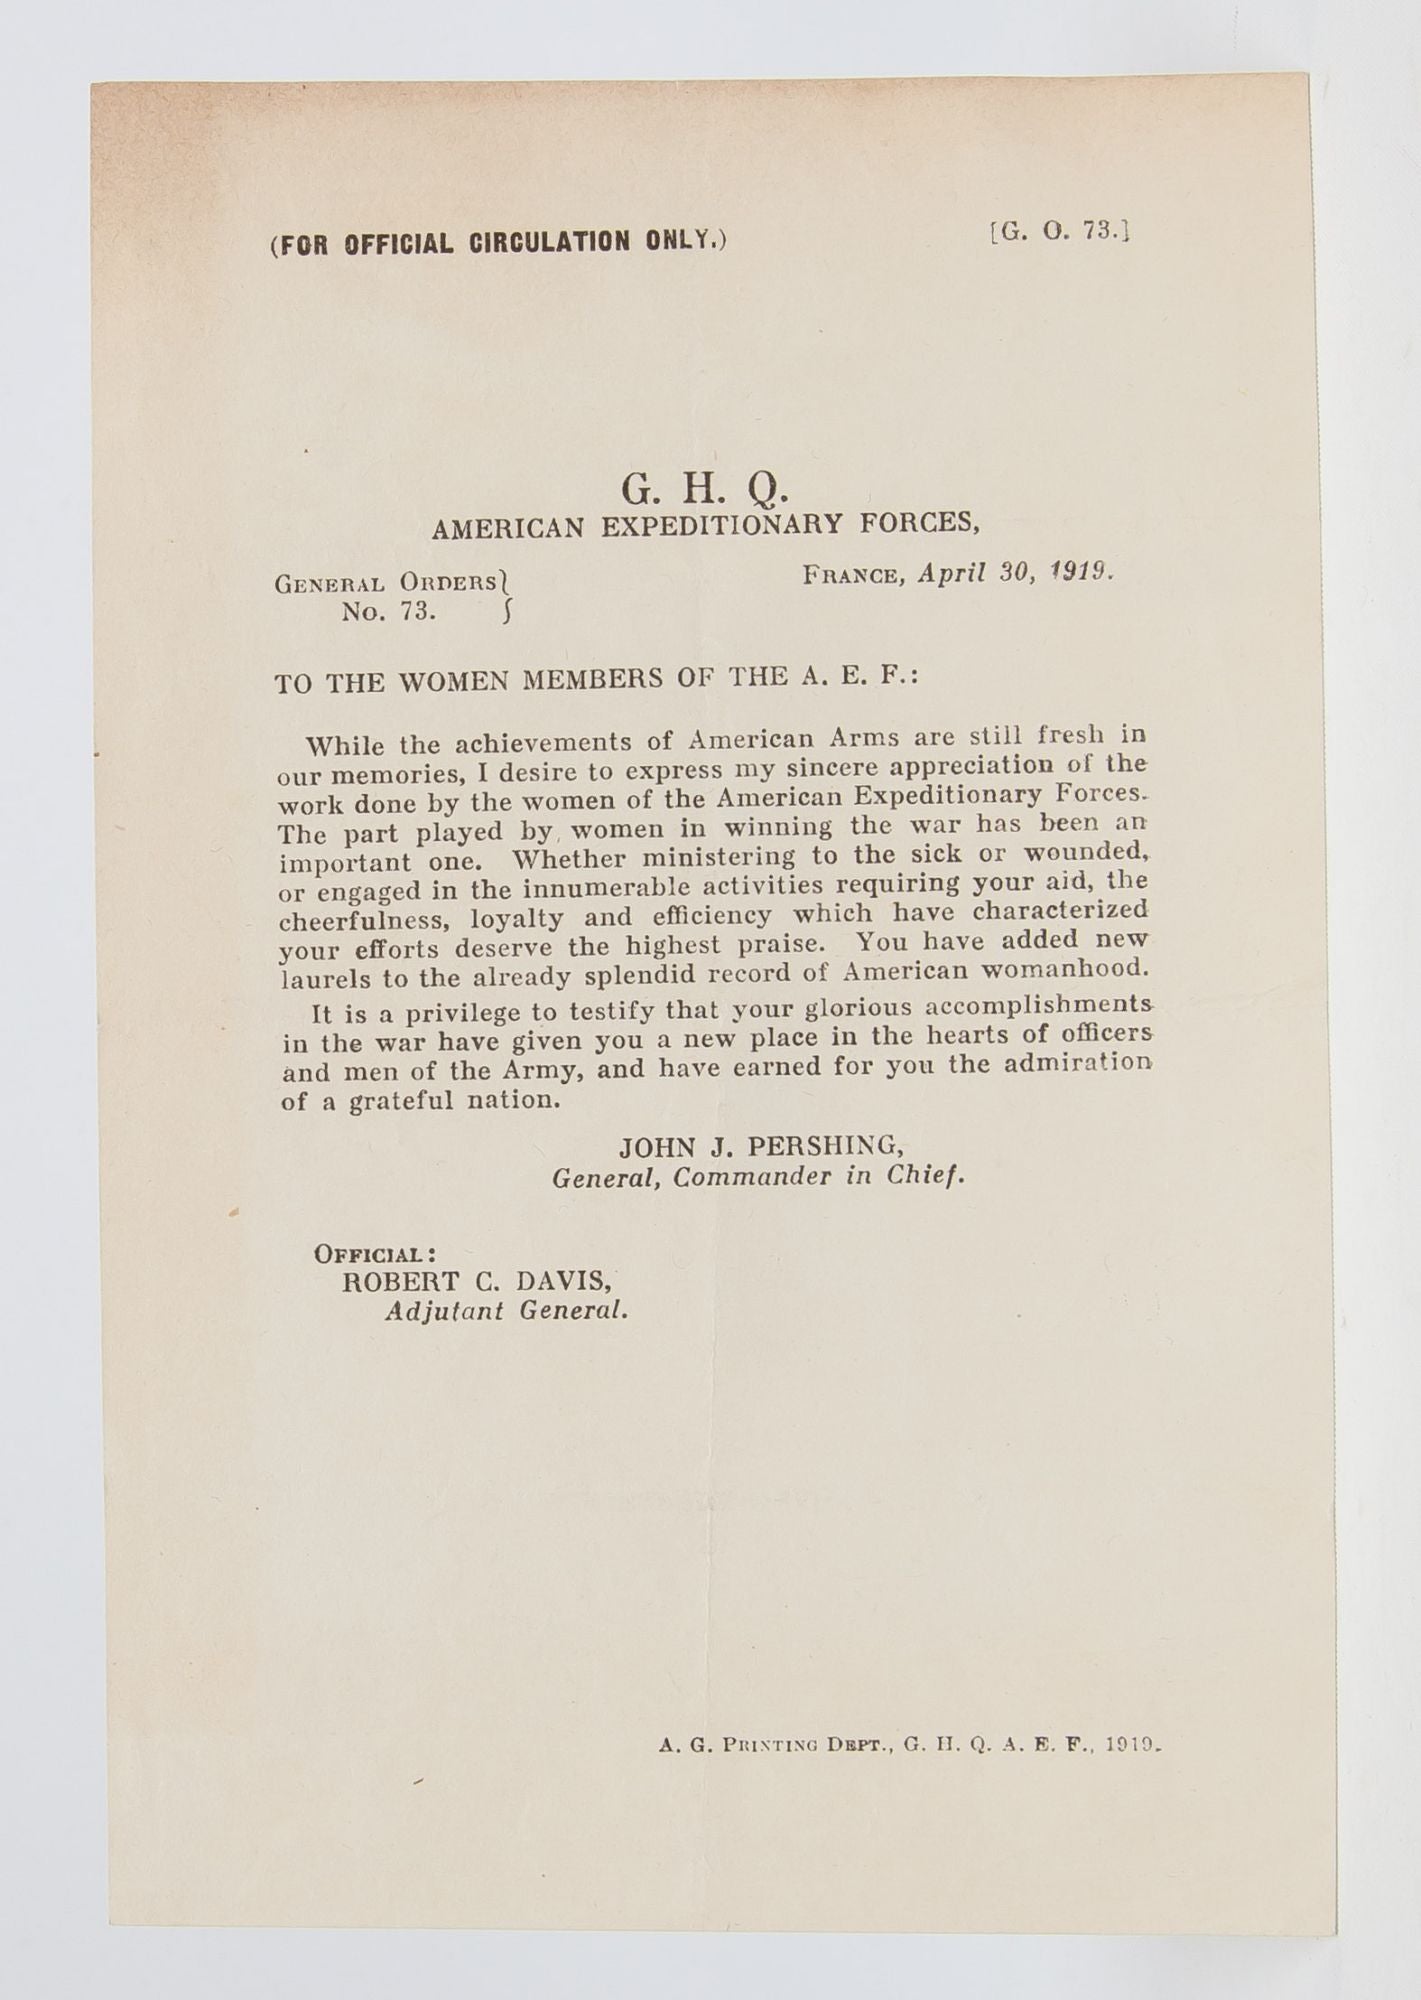 (Item #5562) G.H.Q. American Expeditionary Forces. General Orders No. 73. Women in the Military, John Pershing.